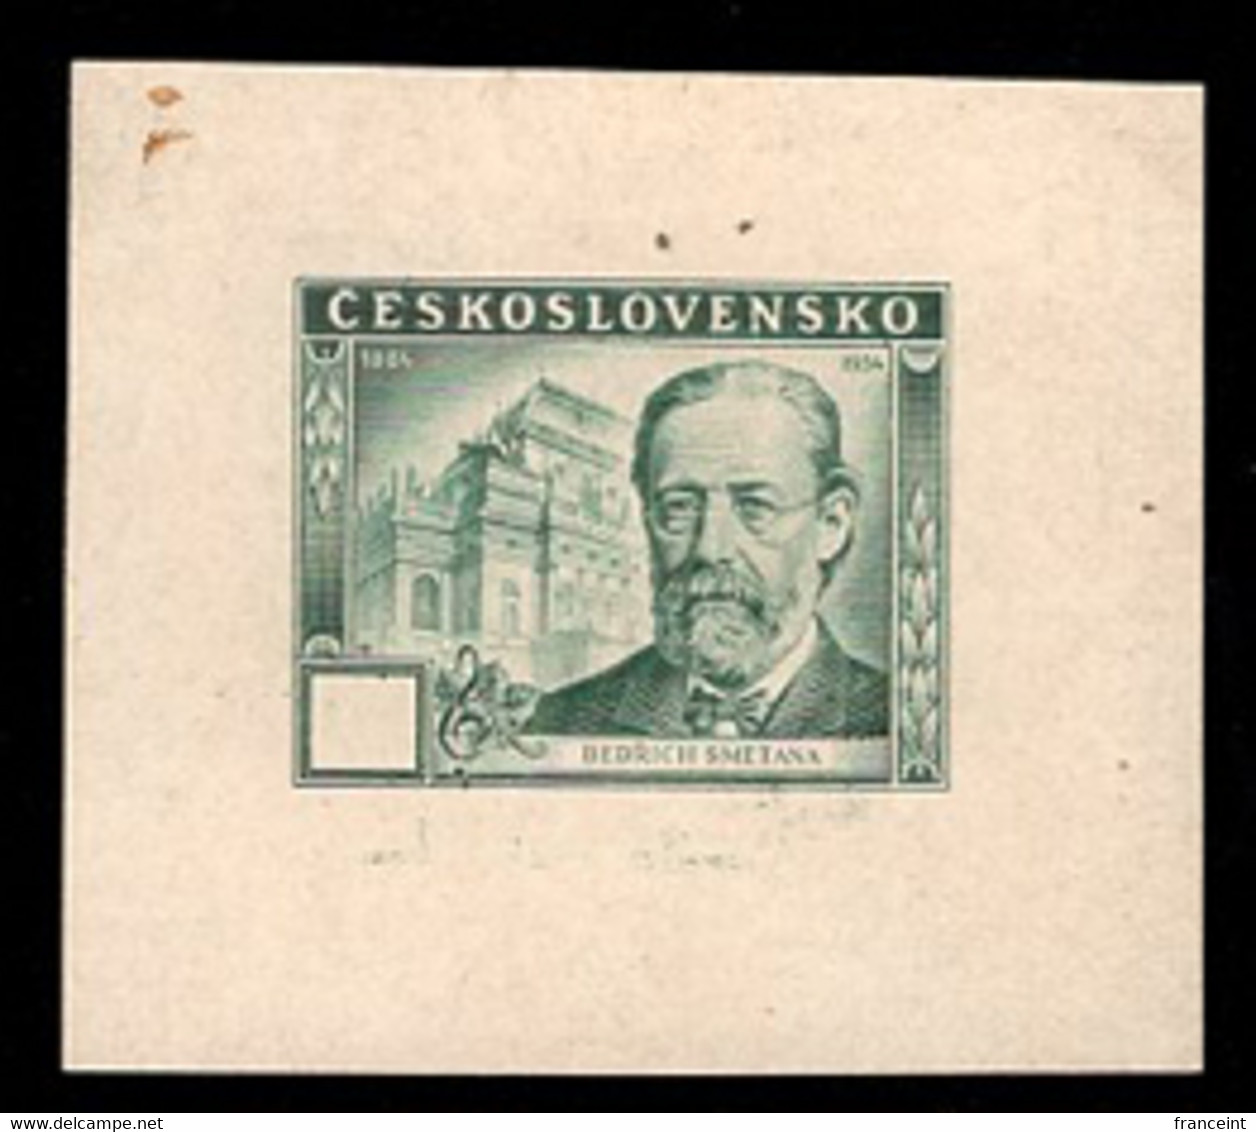 CZECHOSLOVAKIA(1949) Bedrich Smetana. Die Proof In Green Without Value In Tablet. Scott No 386. Yvert No 506. - Proofs & Reprints